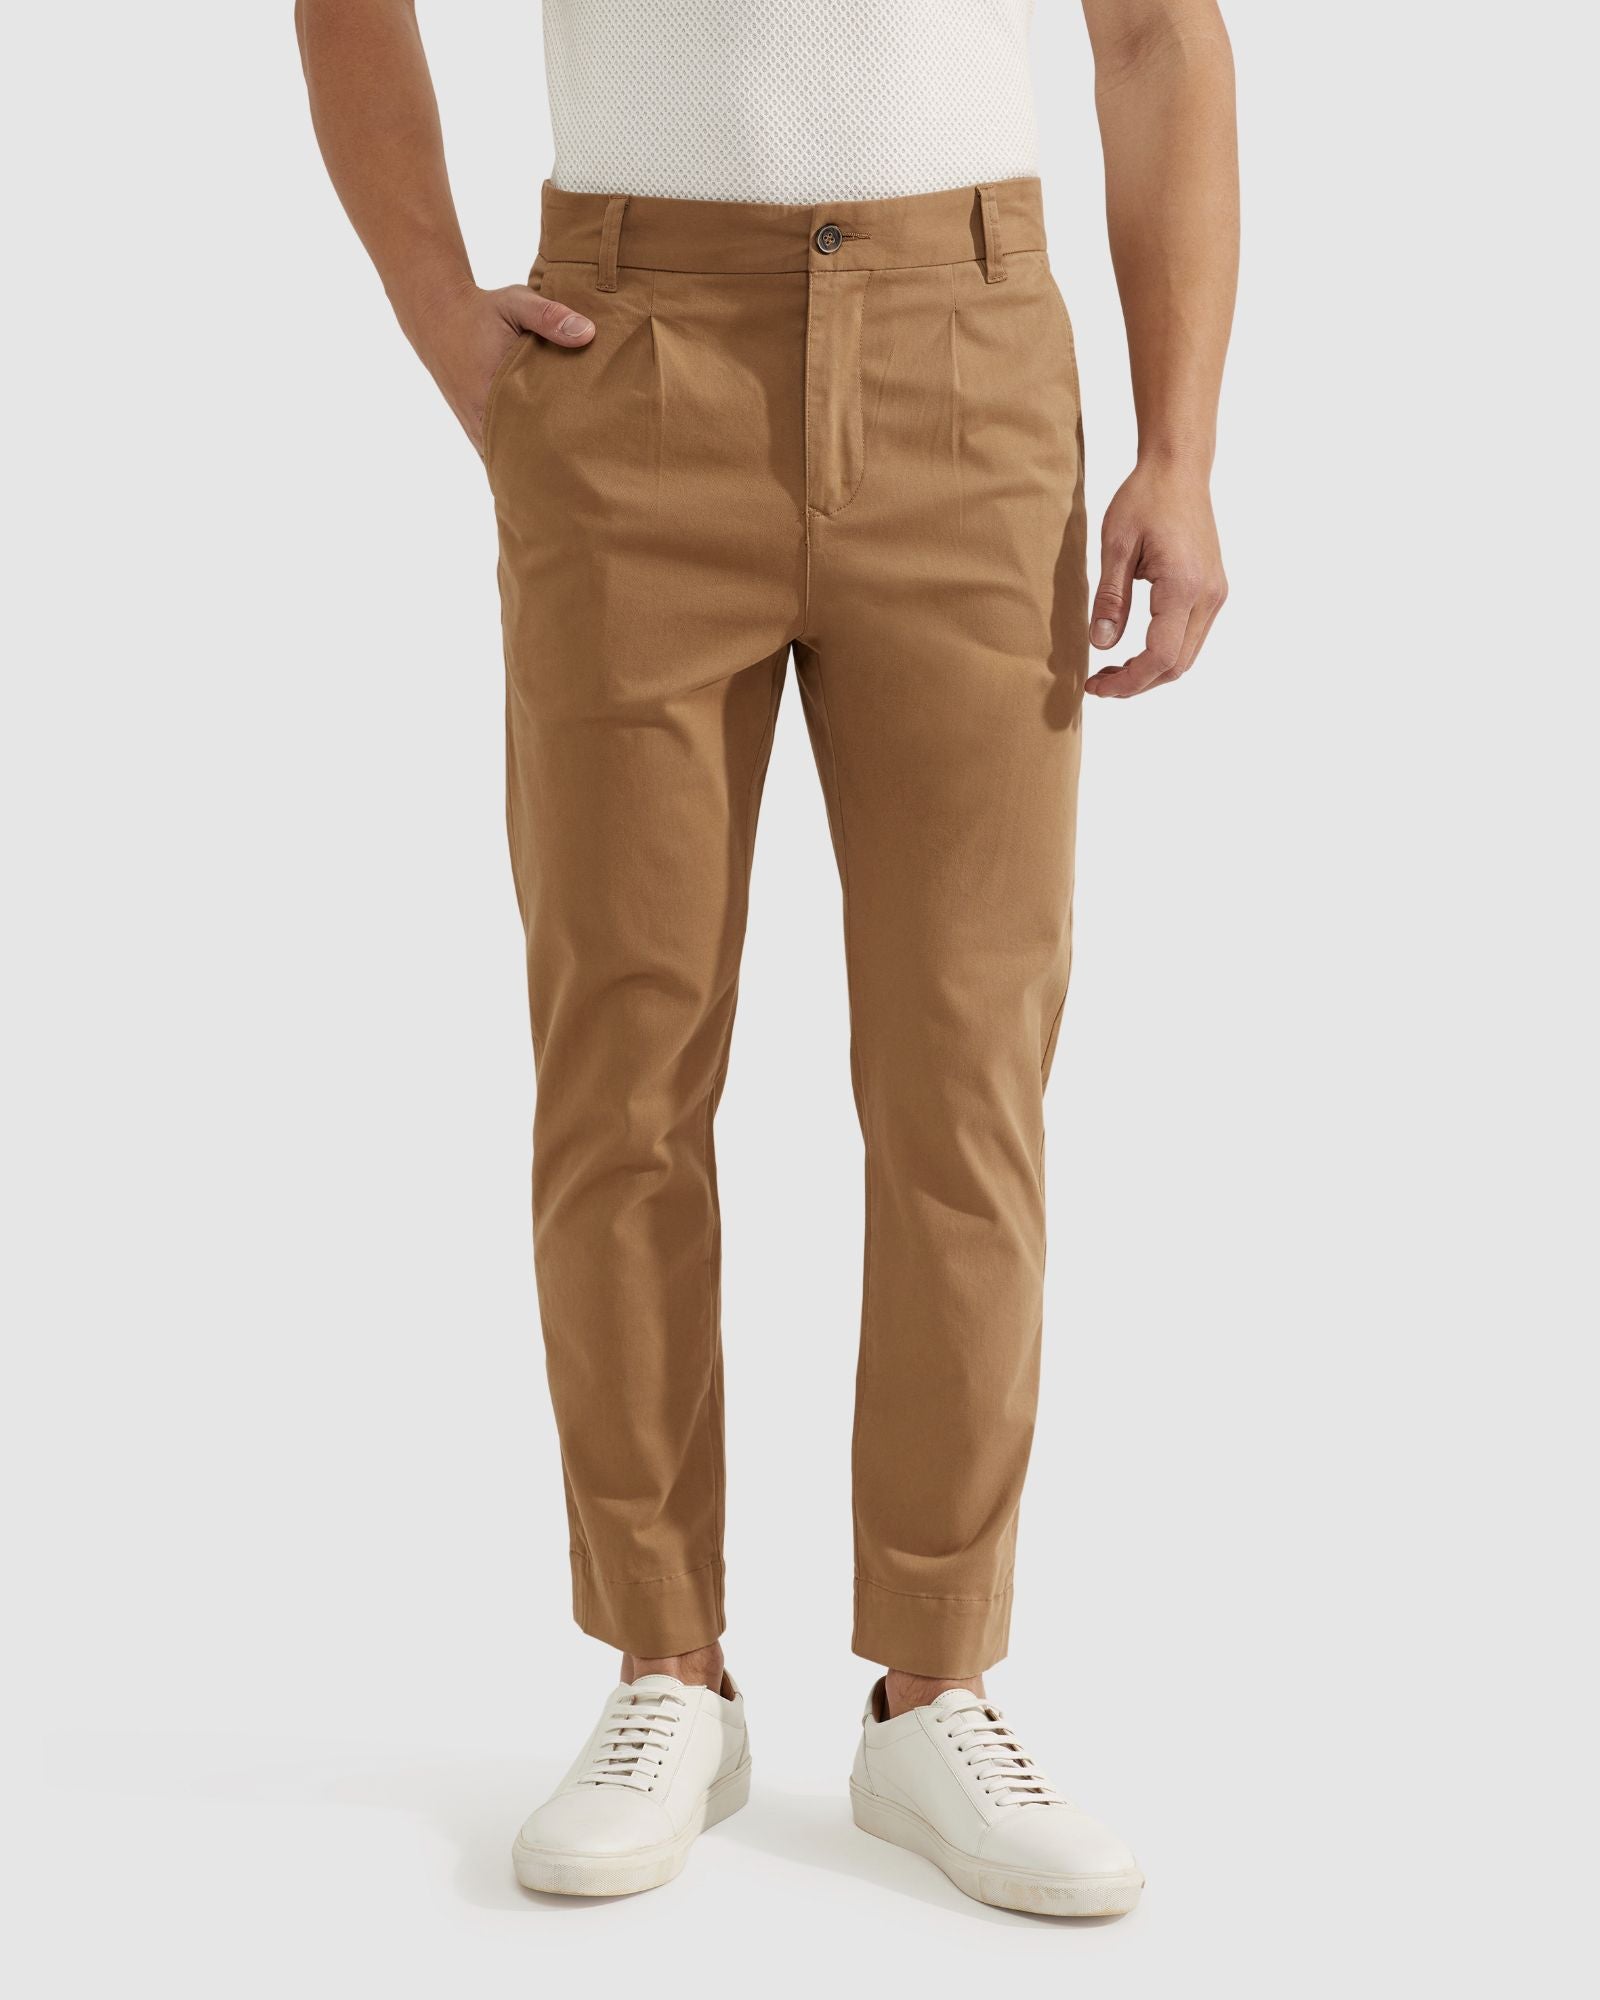 Men's Slim Fit Chinos in Capuccino Brown | Savile Row Co